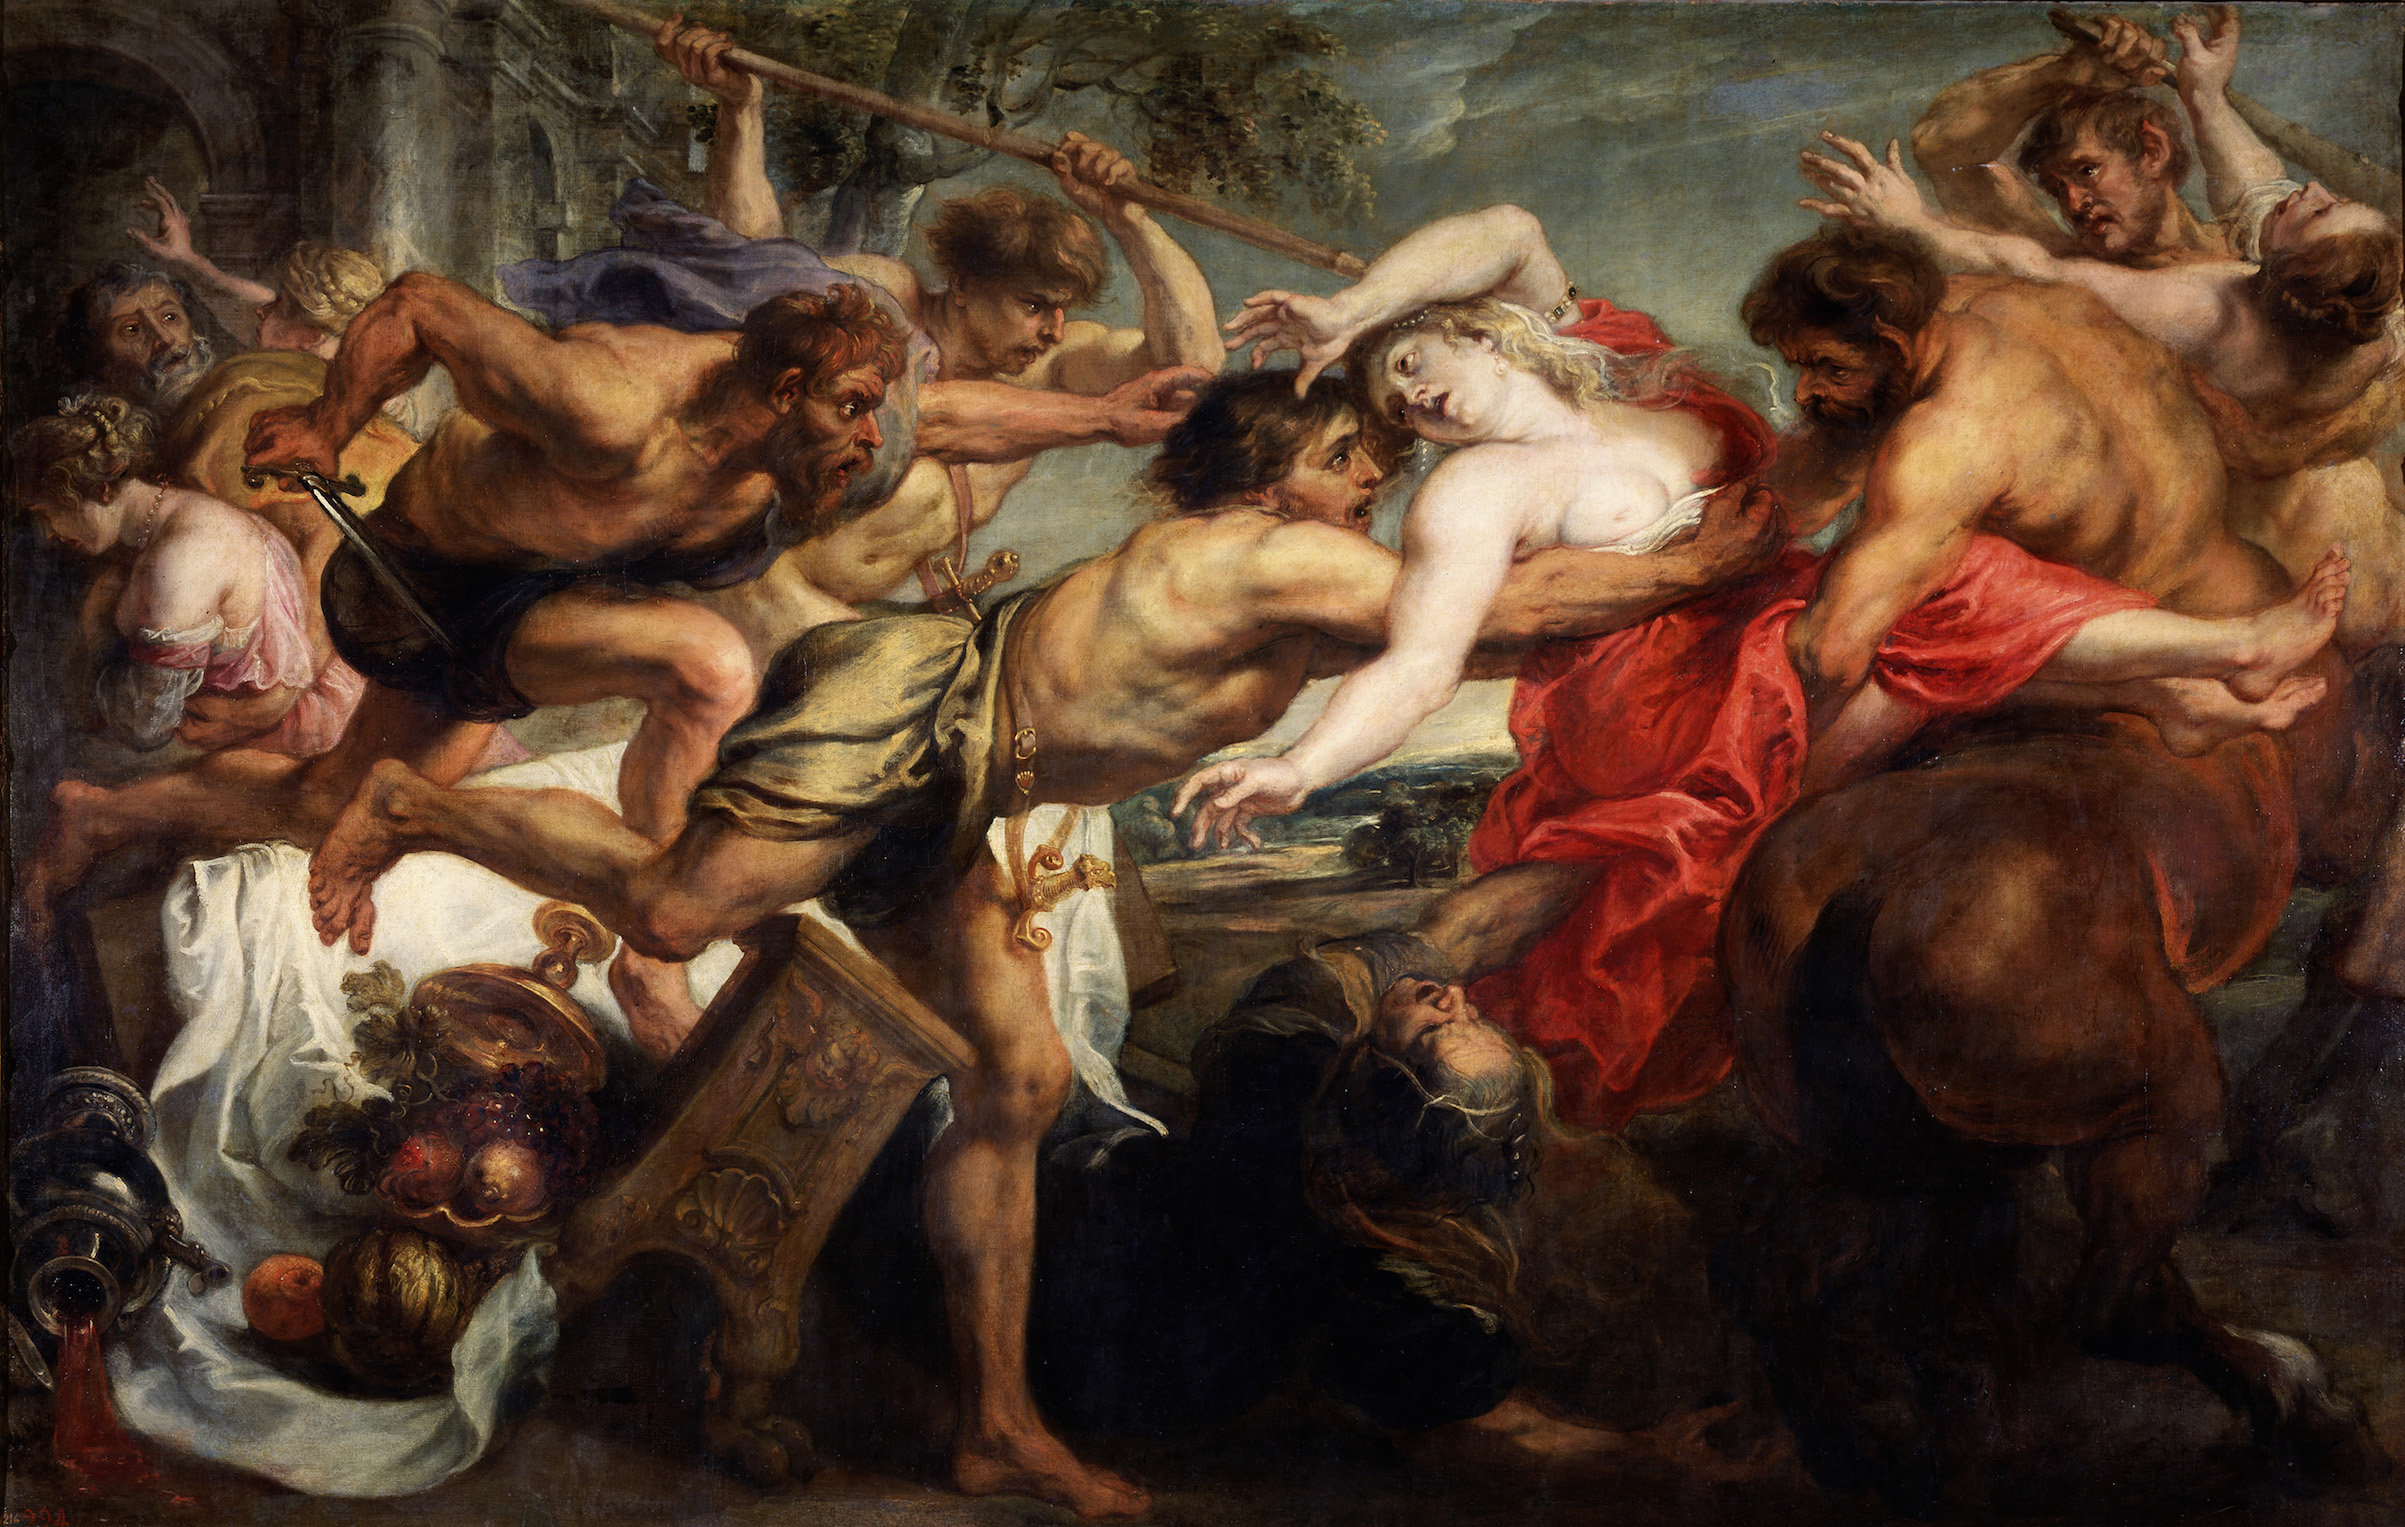 The Abduction of Hippodamia, or Lapiths and Centaurs, 1636-1638, by Pieter Paul Rubens. The story of the battle of the Lapiths and Centaurs is part of Ovid's 'Metamorphoses.' (Heritage Images/Getty Images)